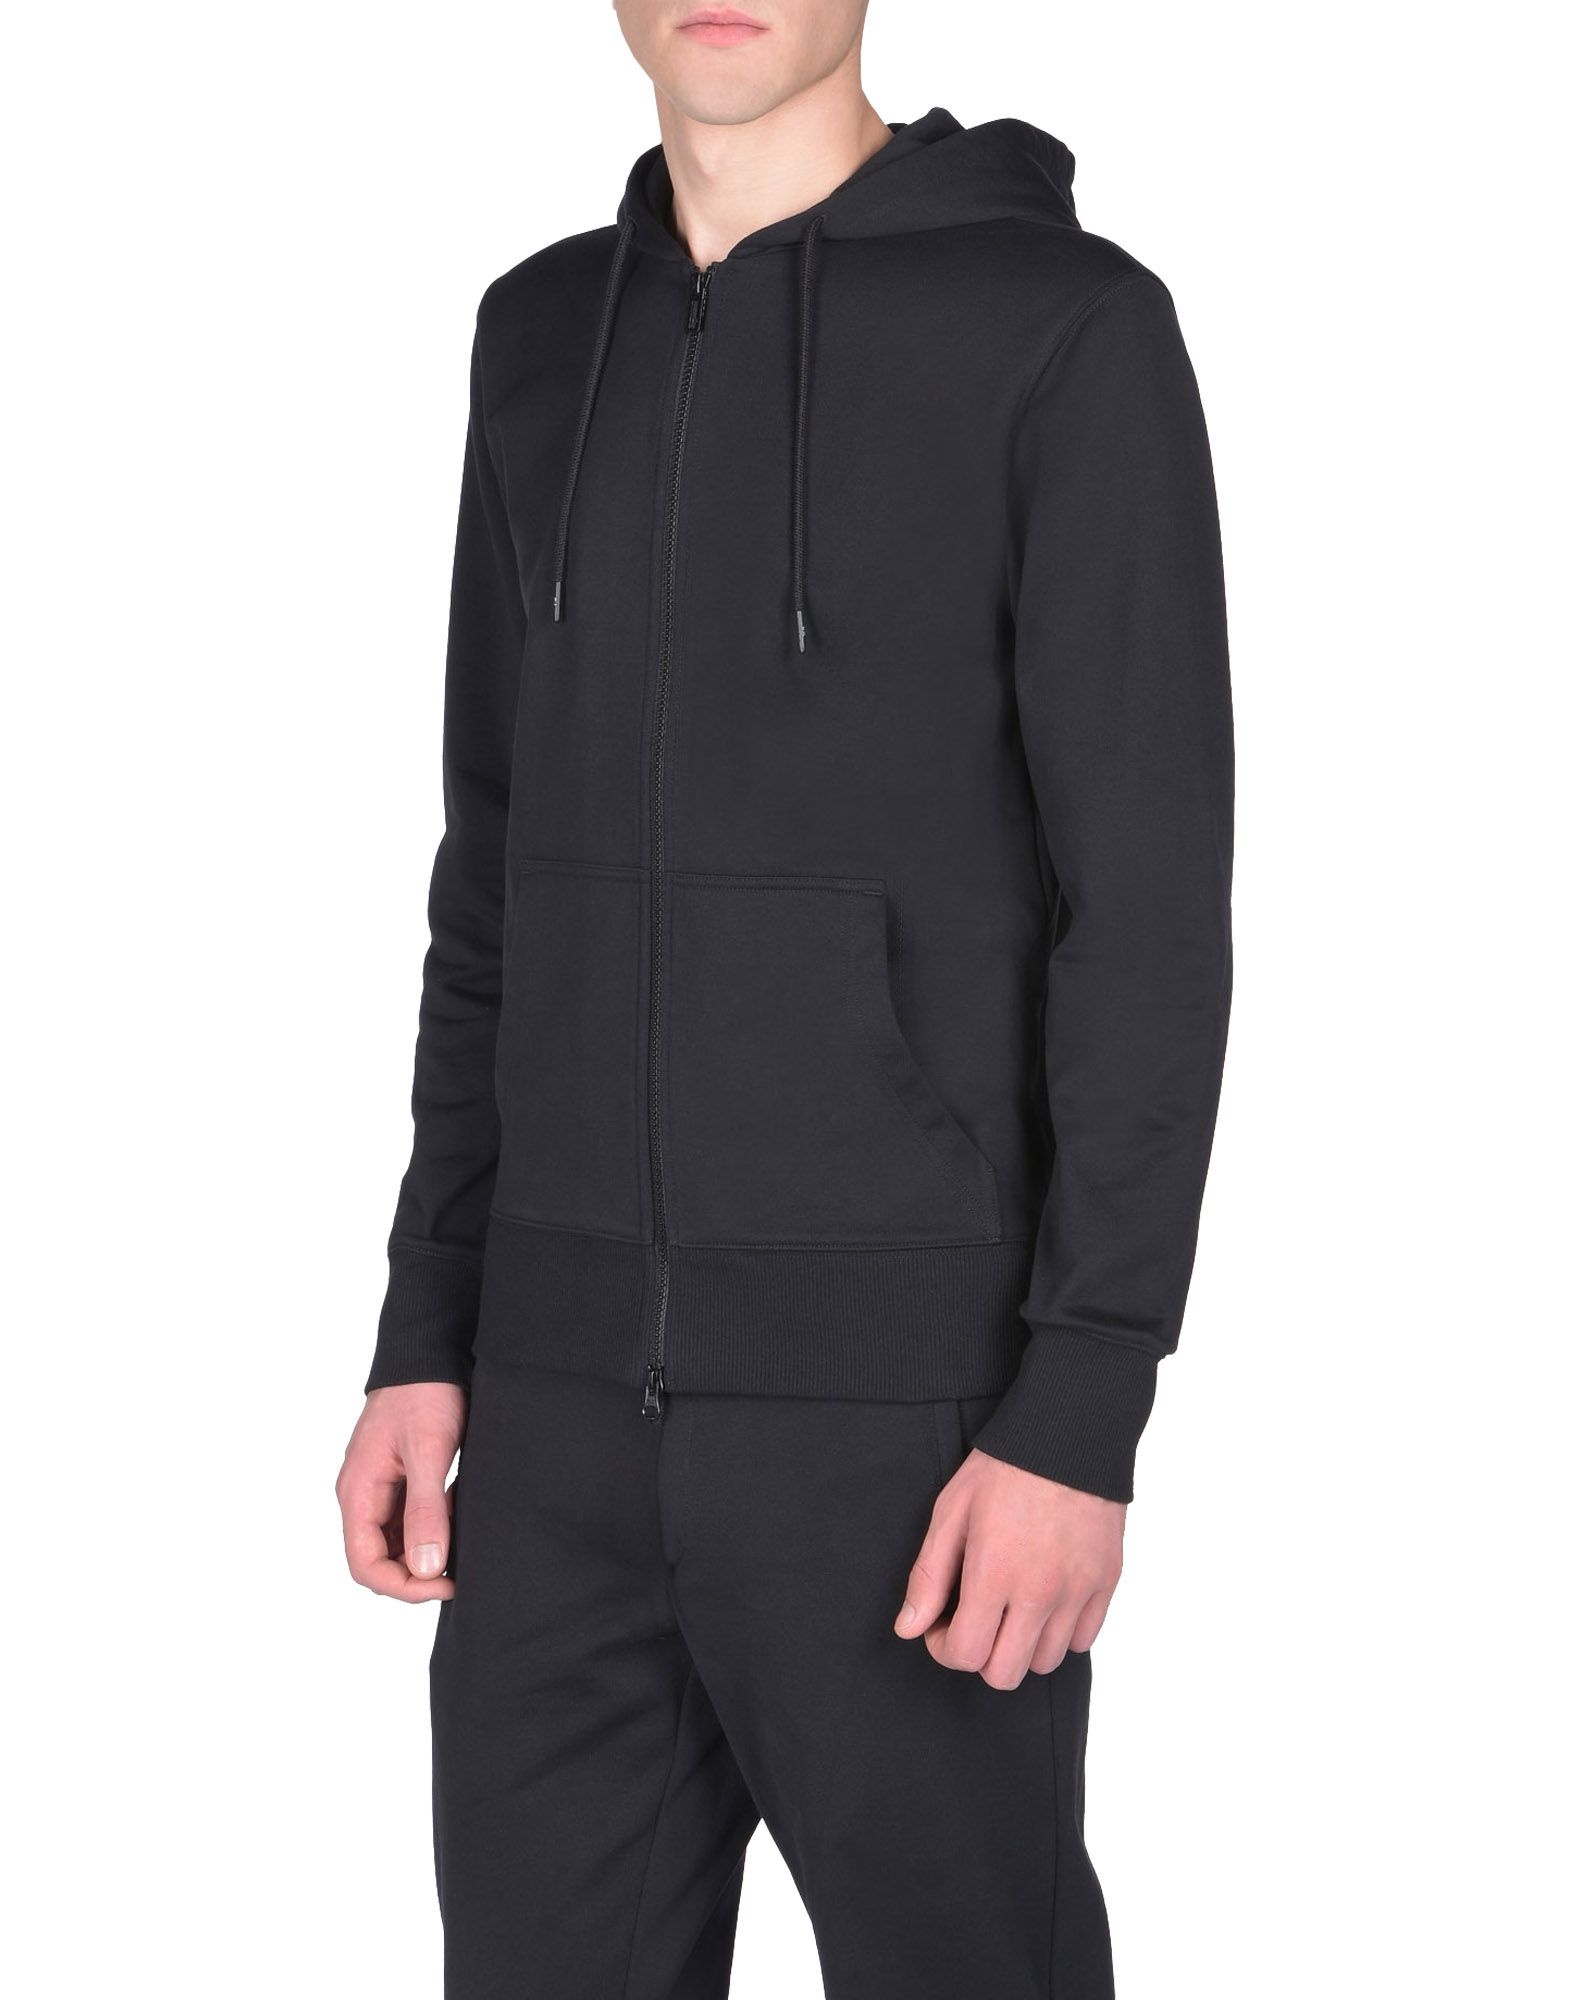 Y 3 Classic FT Hoodie for Men | Adidas Y-3 Official Store